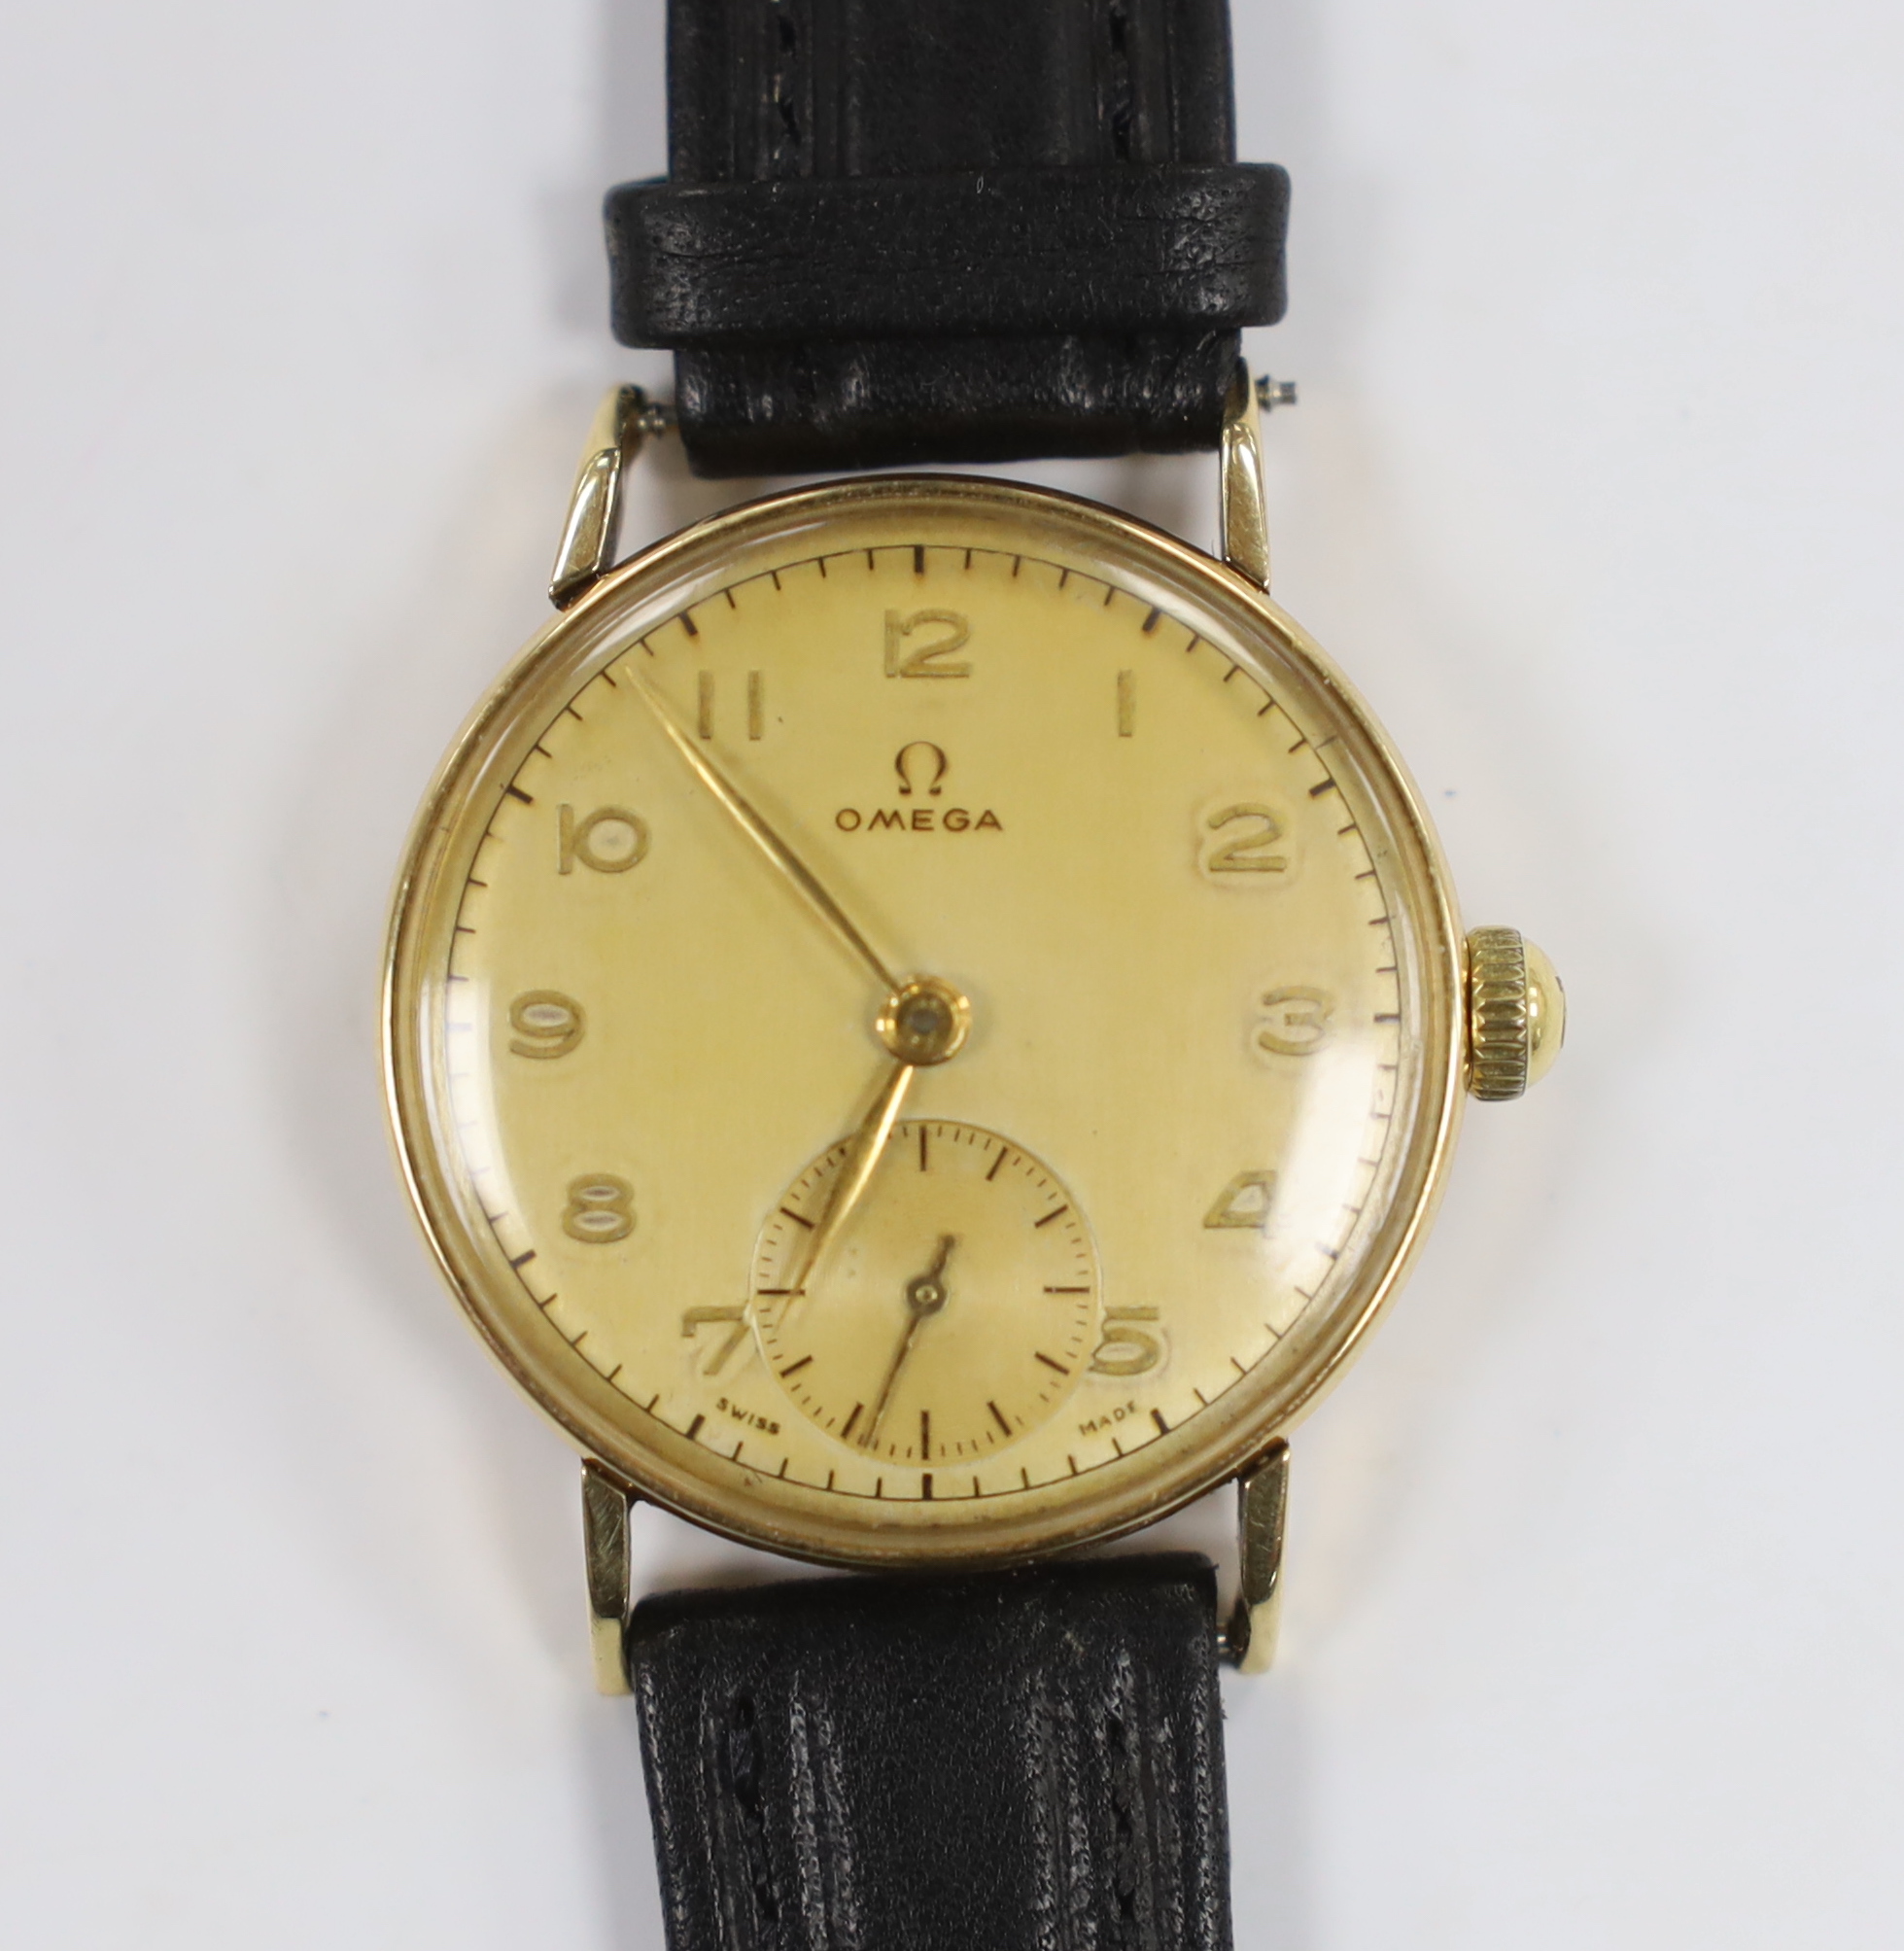 A gentleman's mid 1940's 14ct gold Omega manual wind wrist watch, movement c.26.5.T3, case diameter 31mm, on later associated leather strap.